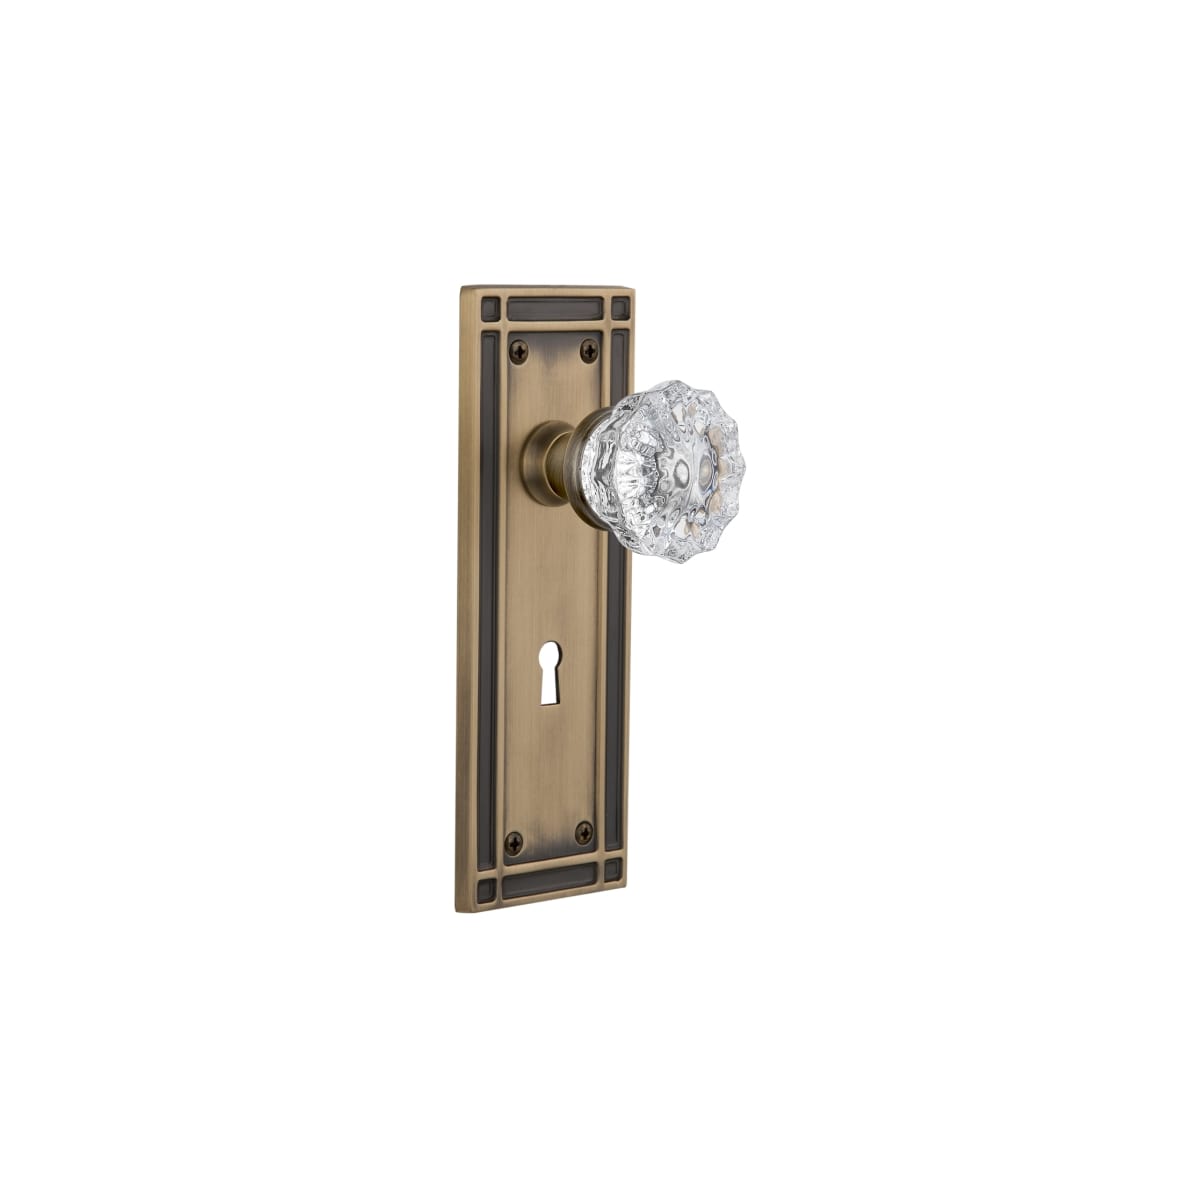 Nostalgic Warehouse 703398 Timeless Bronze Vintage Fluted Crystal Privacy Door  Knob Set with Solid Brass Mission Style Back Plate, Keyhole and 2-3/8